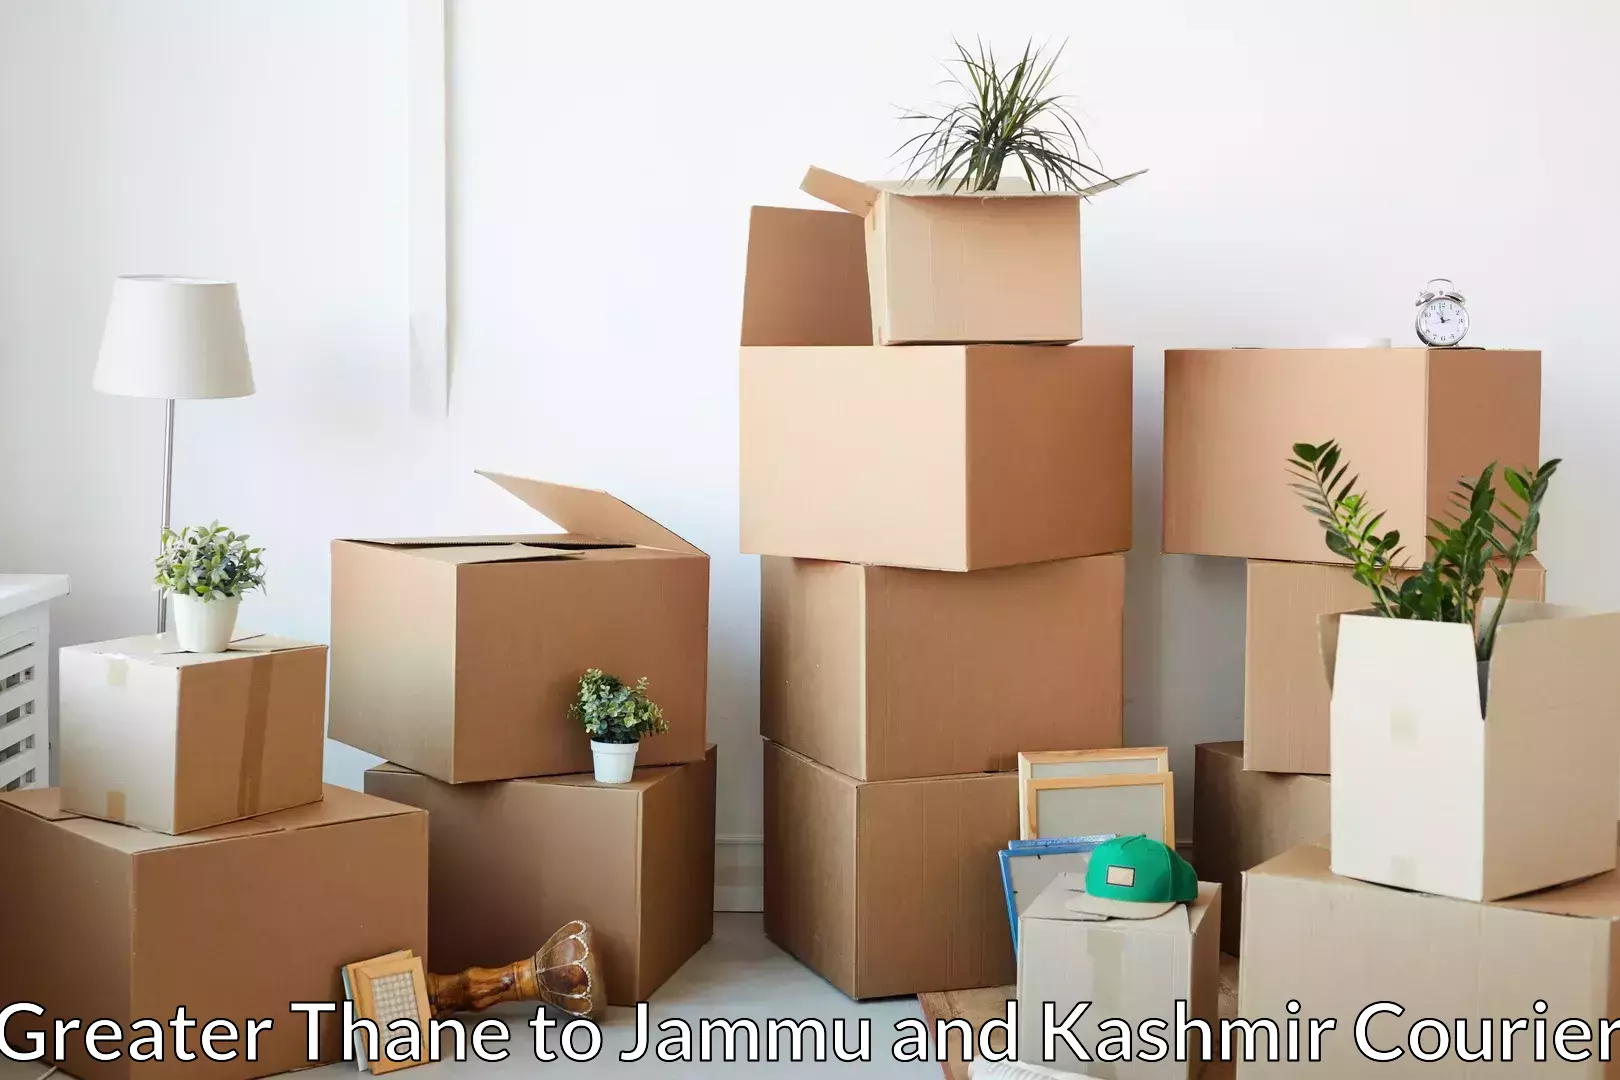 Household moving experts Greater Thane to Srinagar Kashmir